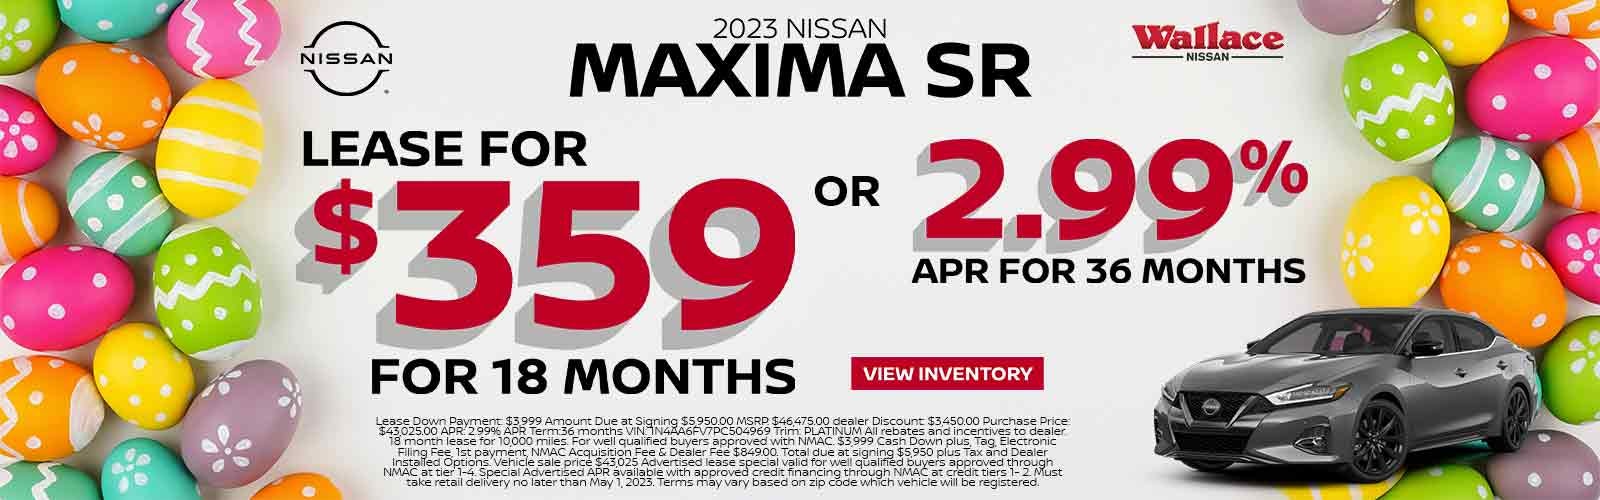 Nissan Maxima Special Offer